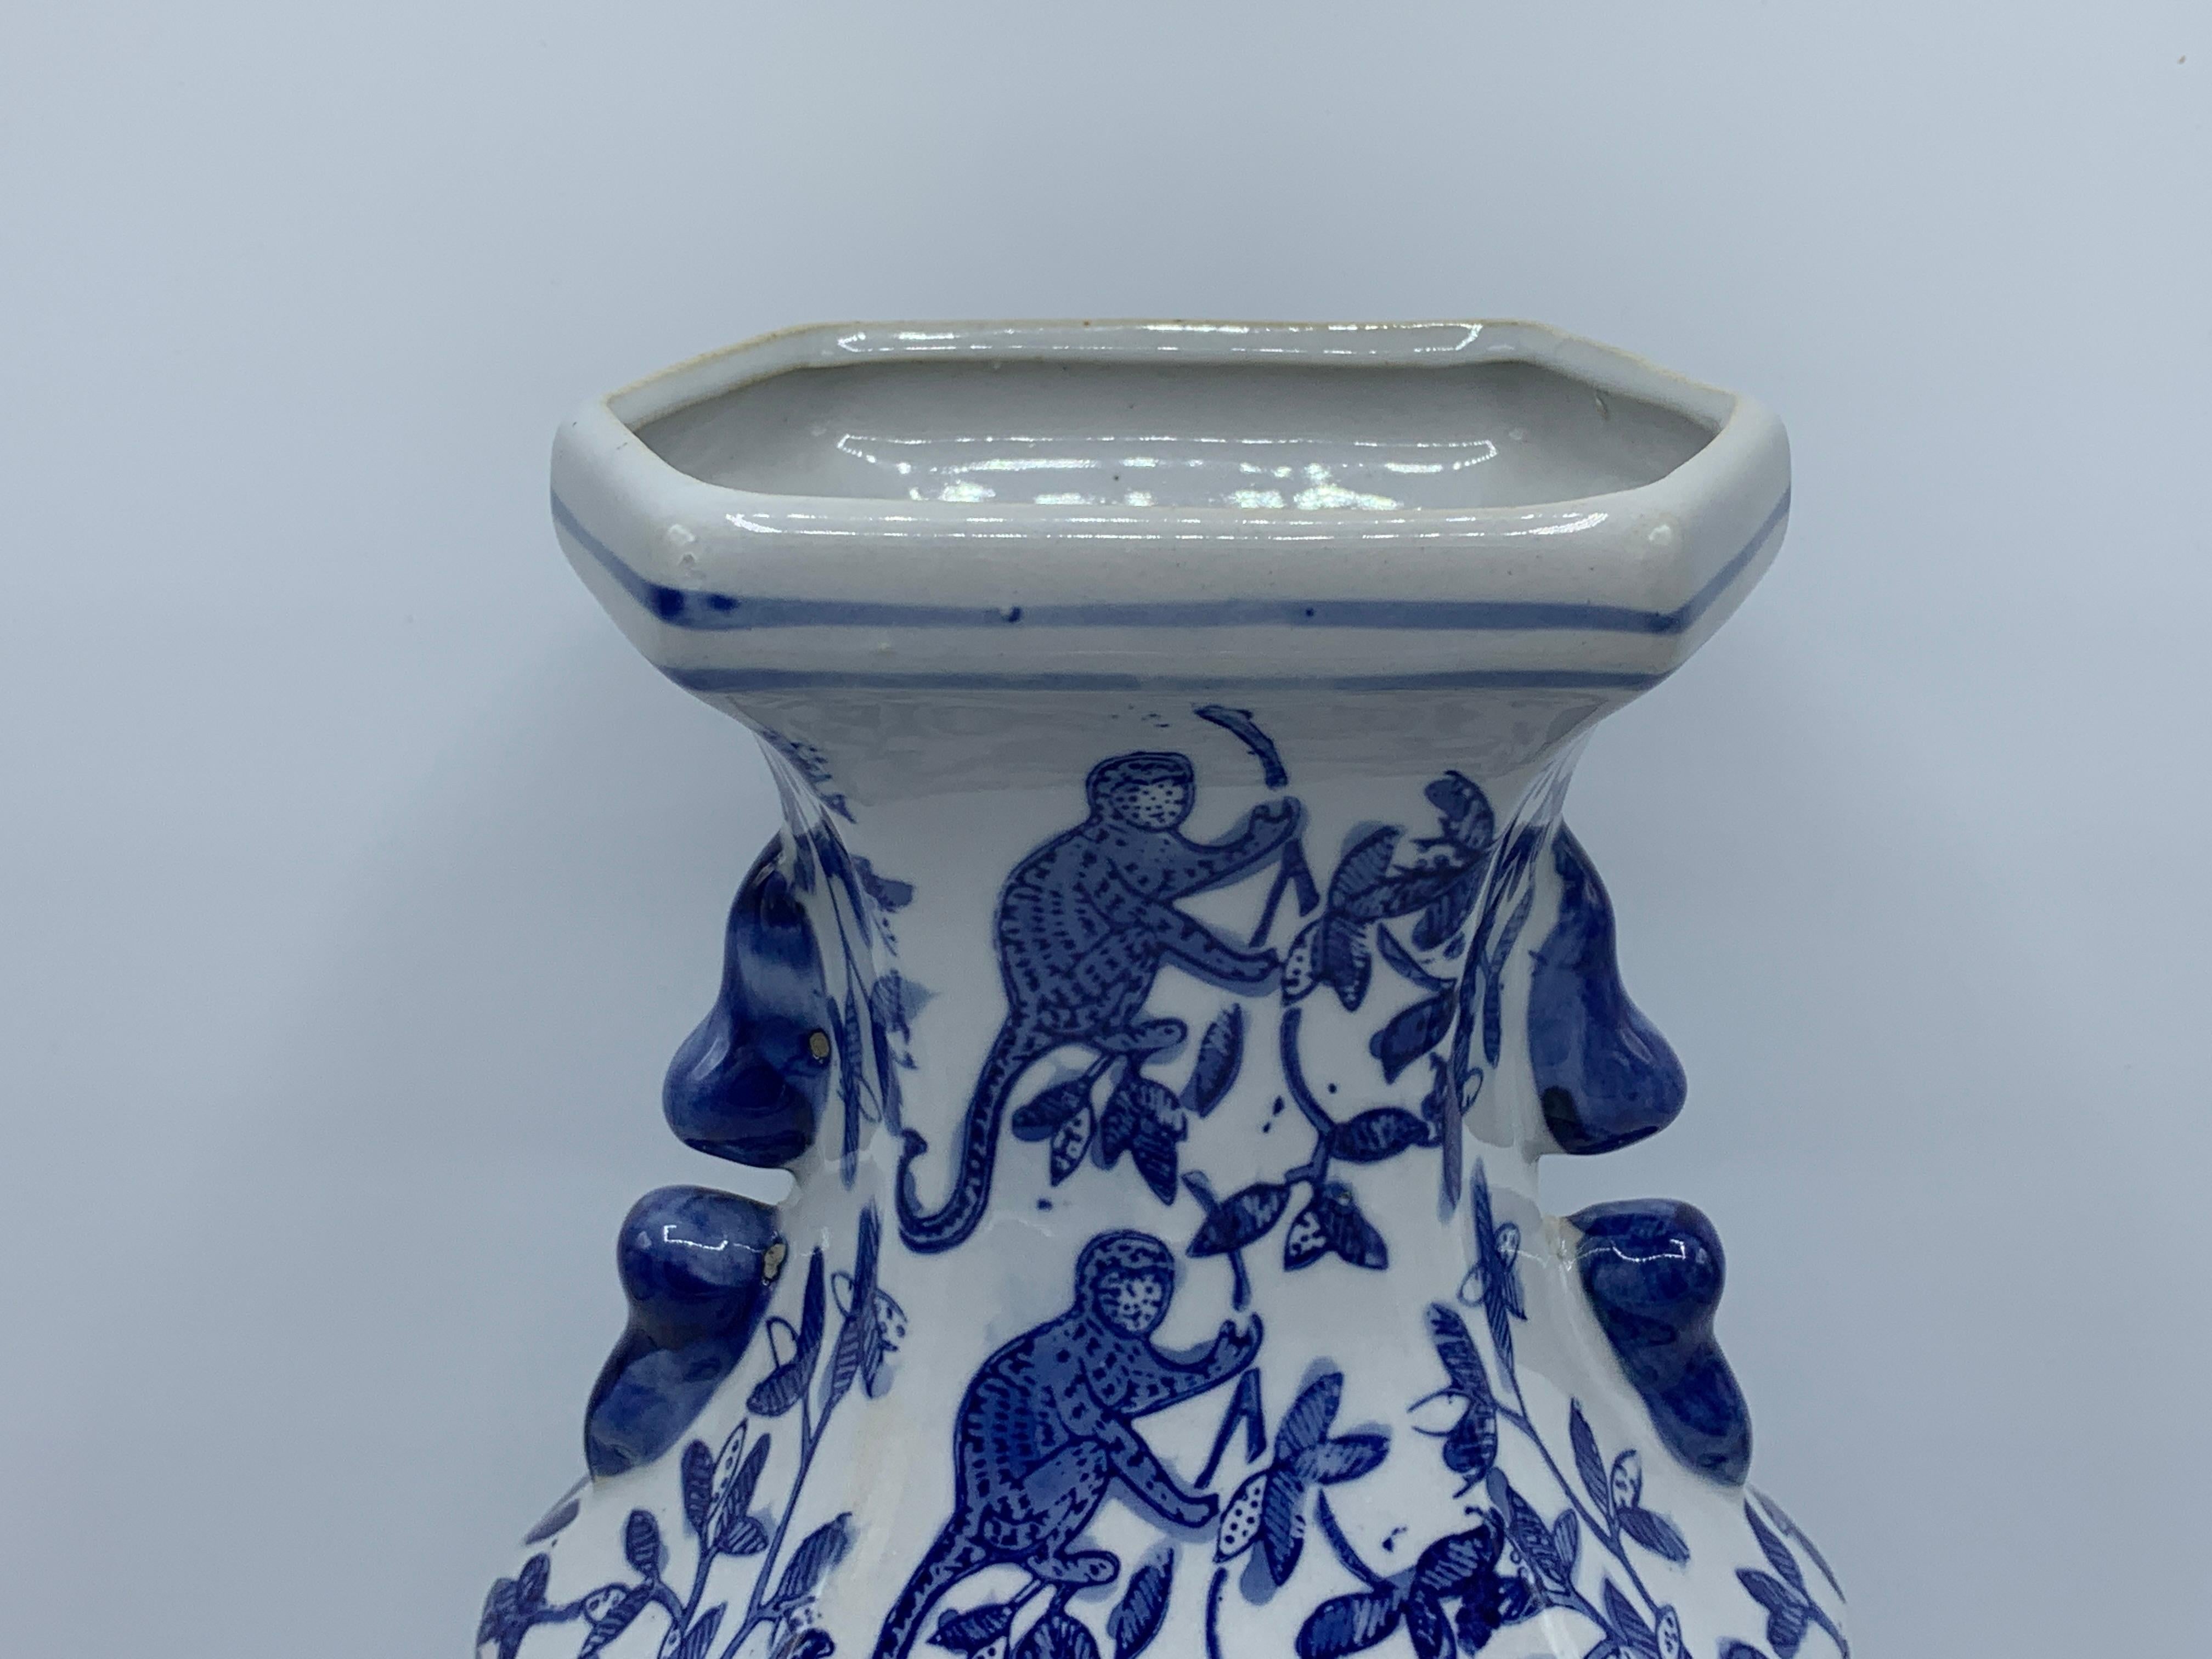 Offered is a gorgeous, 1980s chinoiserie blue and white vase. The piece has a unique and whimsy climbing monkey motif all-over. Heavy, weighing 3.5lbs.